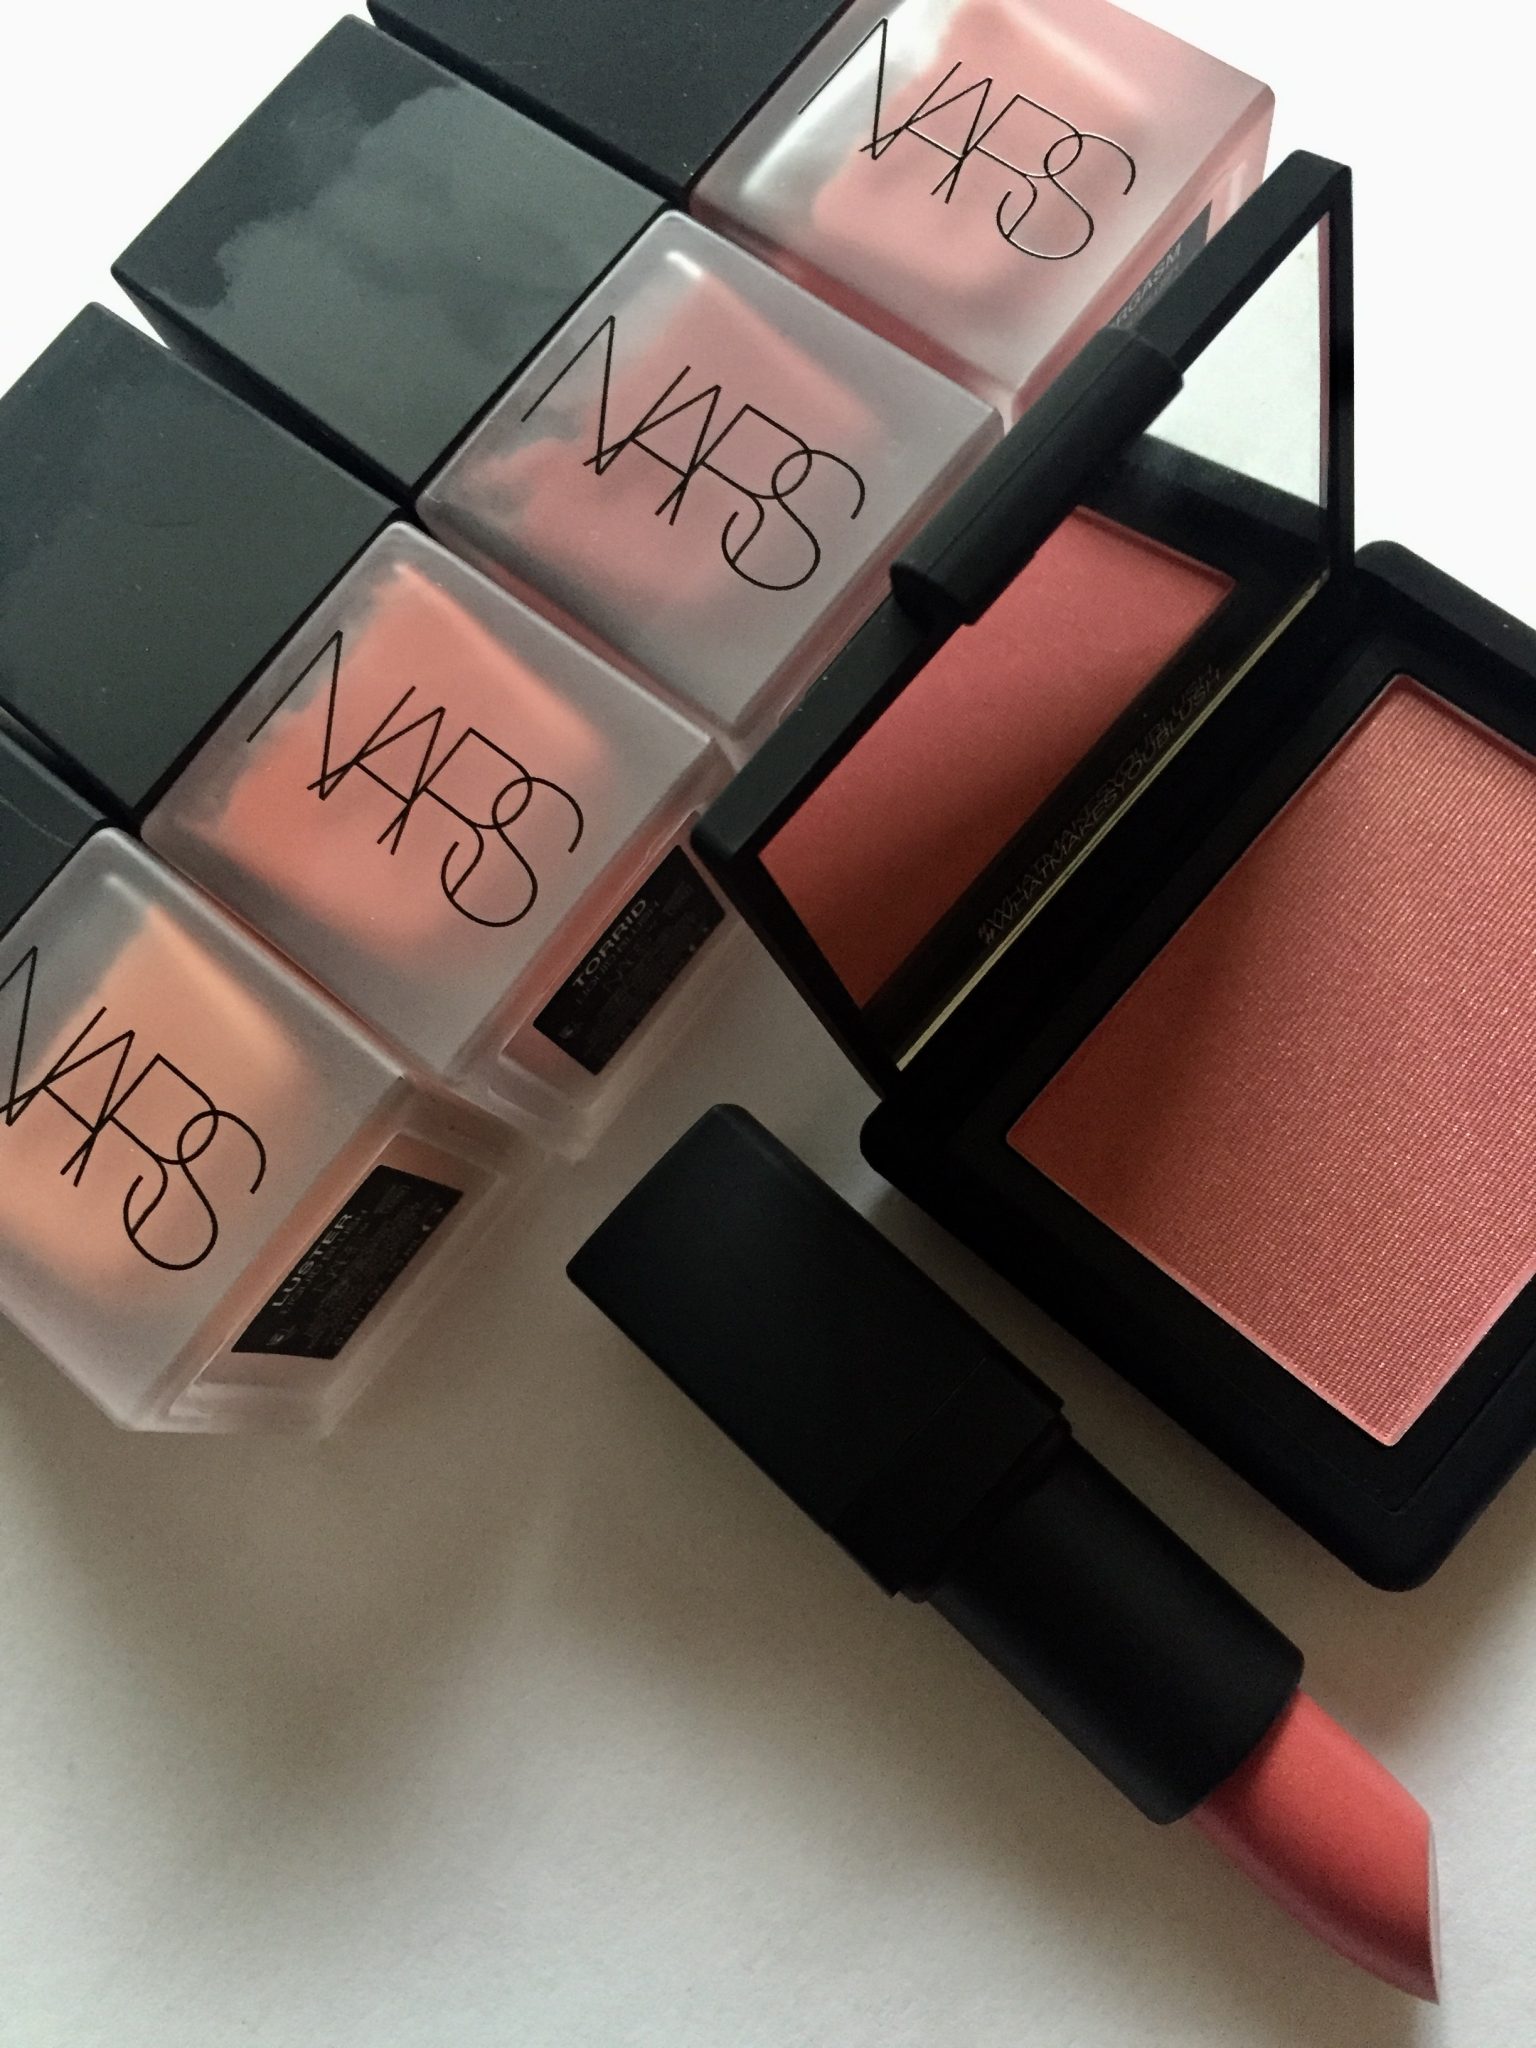 Nars Orgasm Collection